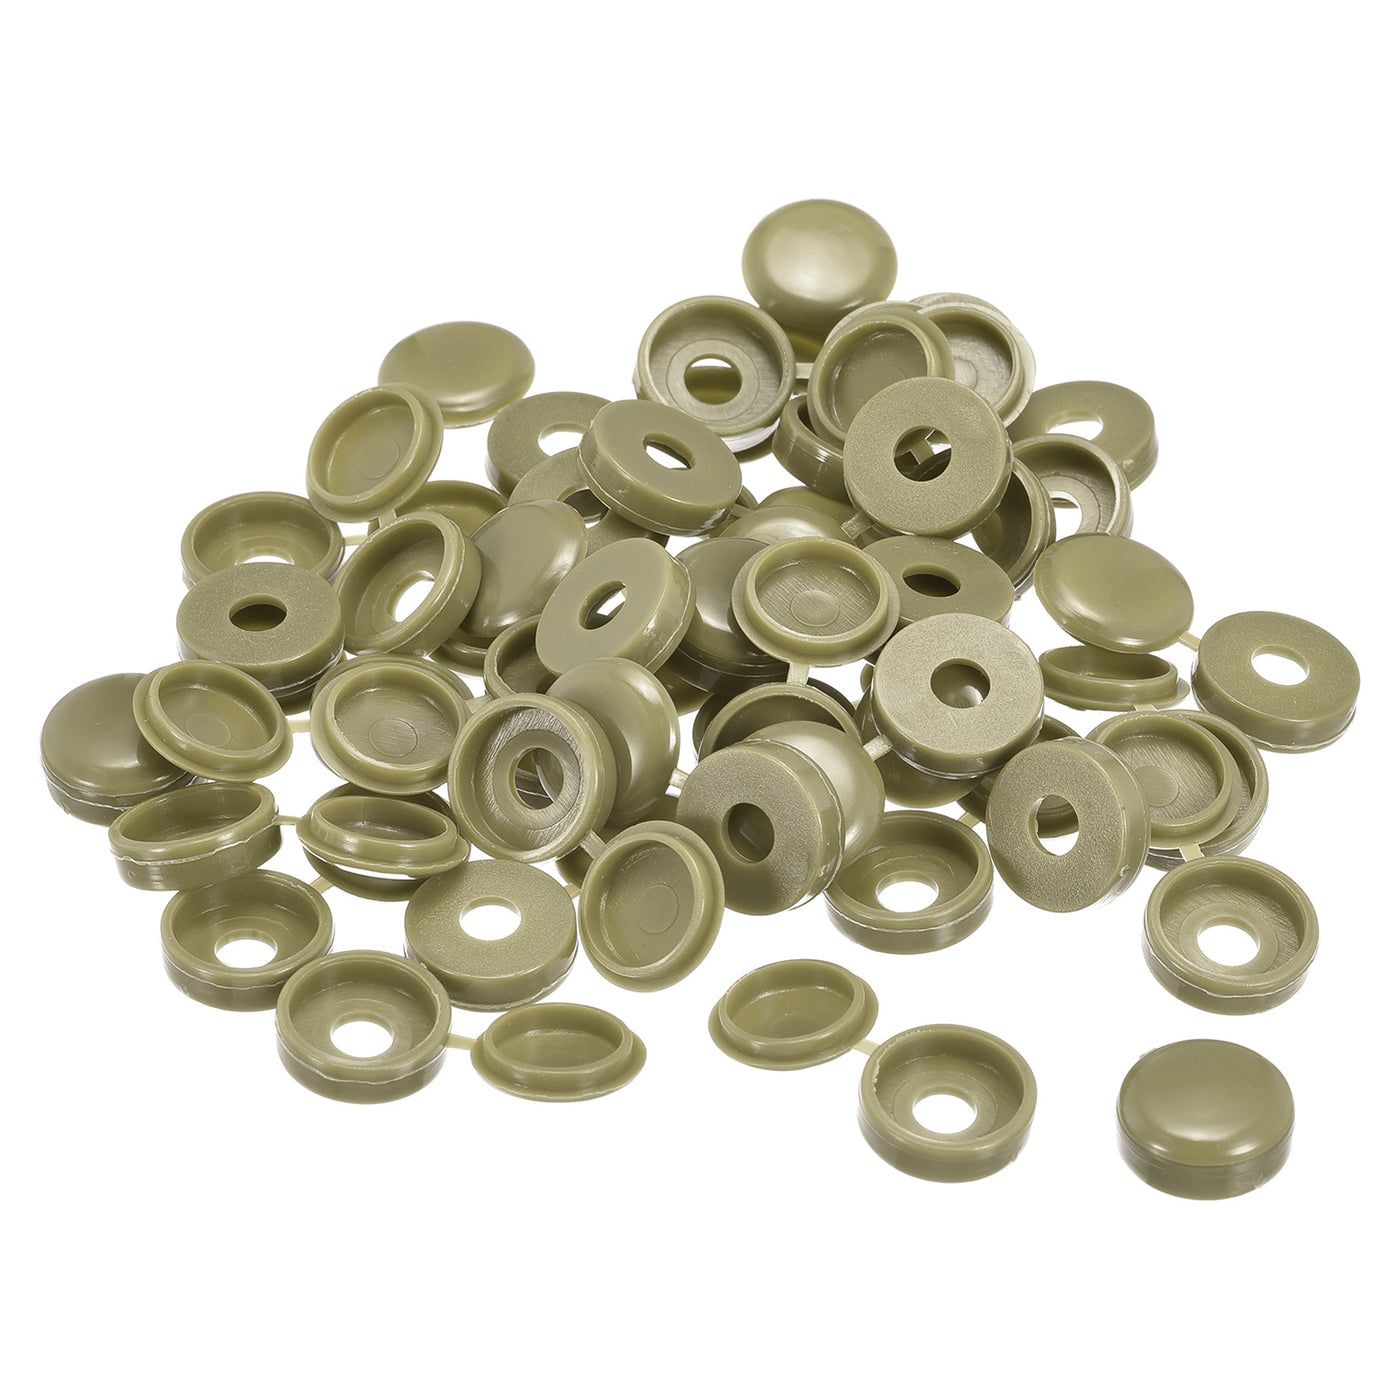 uxcell Uxcell 100Pcs 6mm Hinged Screw Cover Caps Plastic Fold Screw Snap Covers, Green